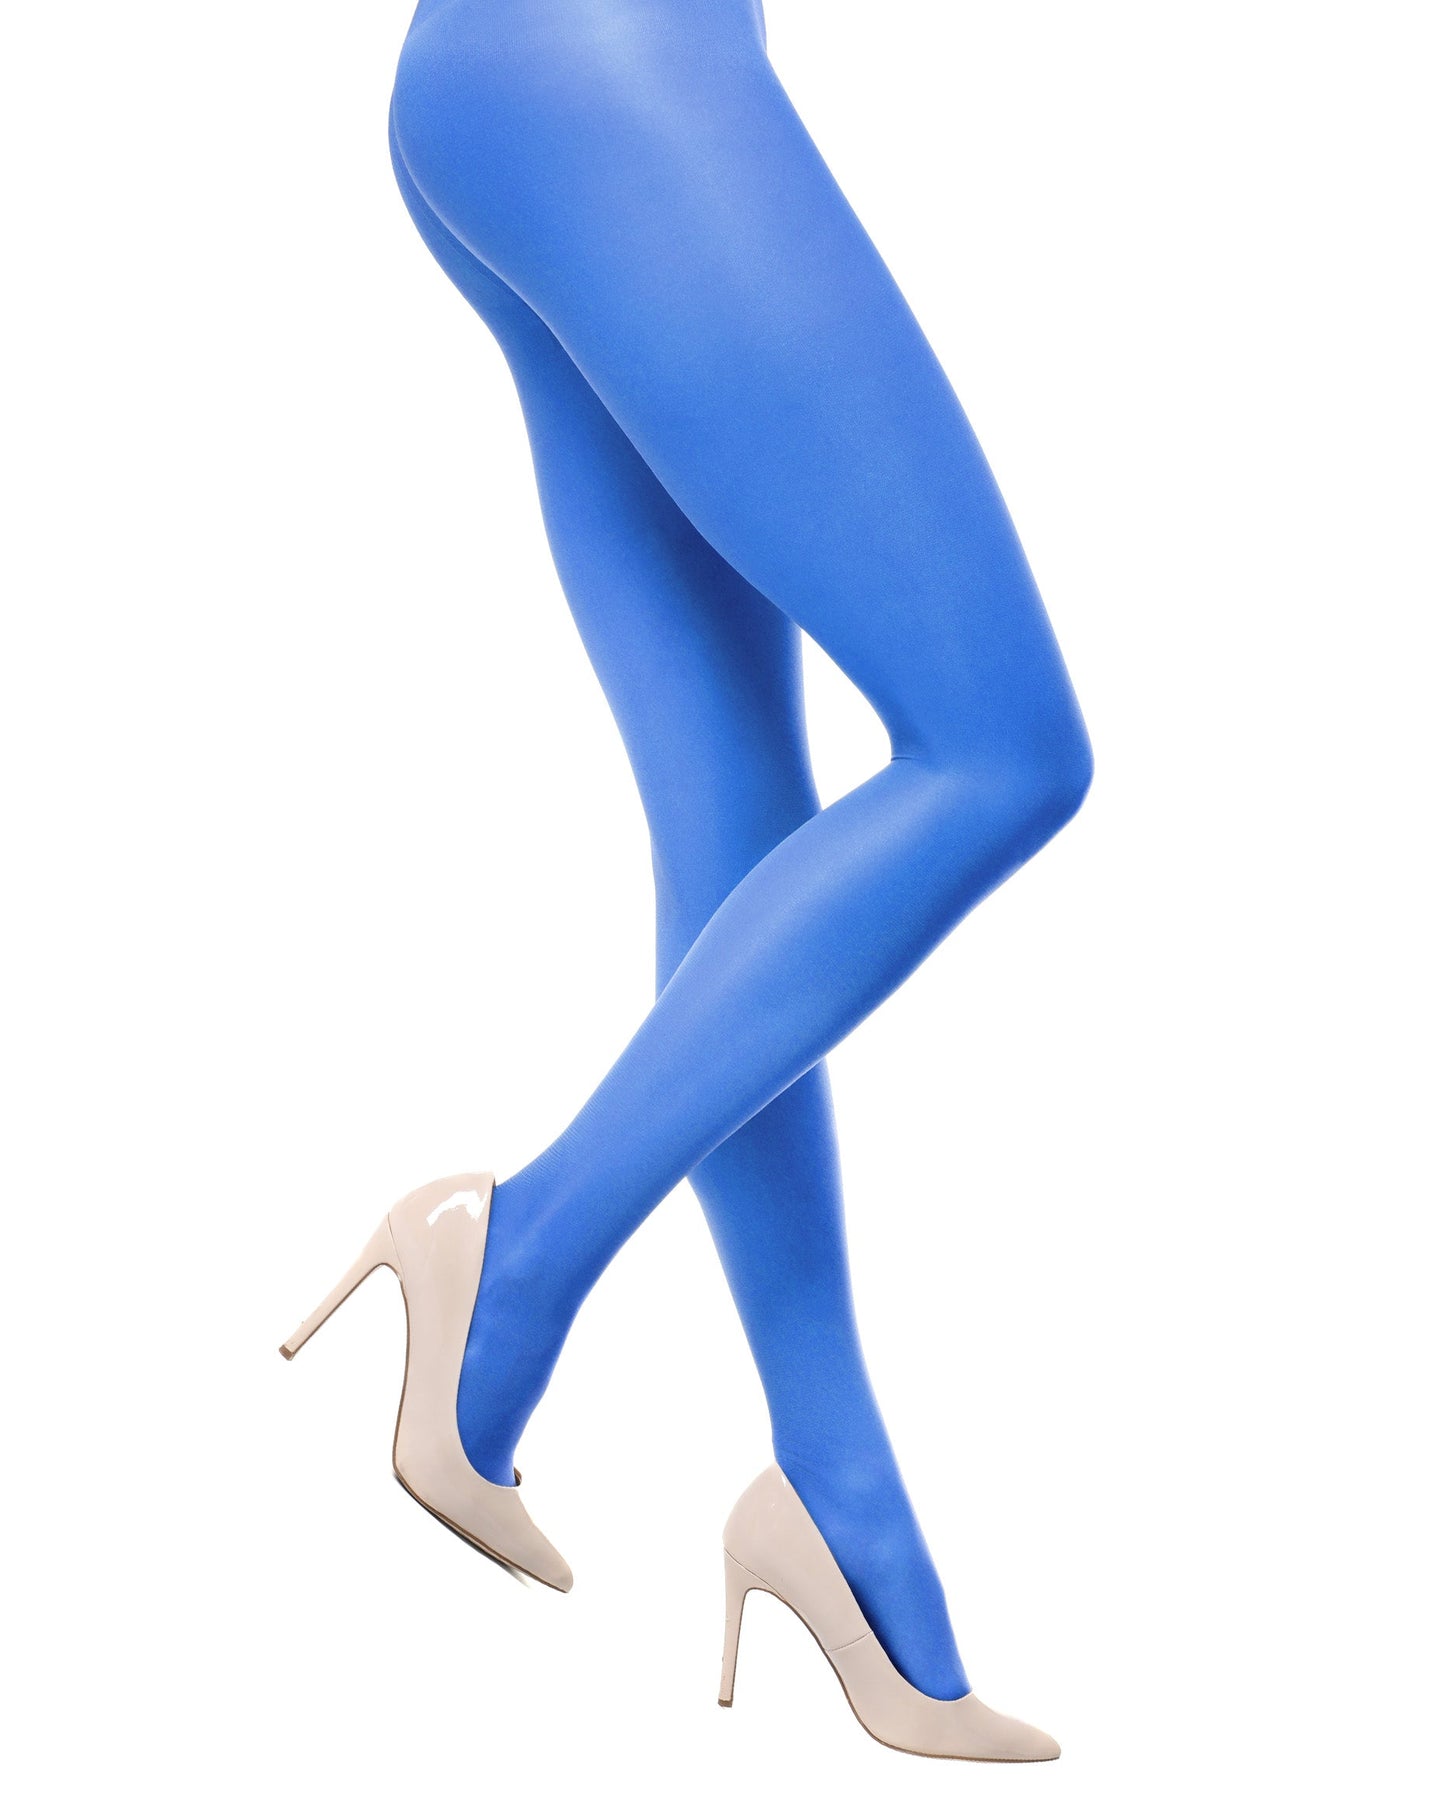 Trasparenze Oleandro 20 Denier Collant - Classic sheer transparent tights in royal electric blue (cobalto)